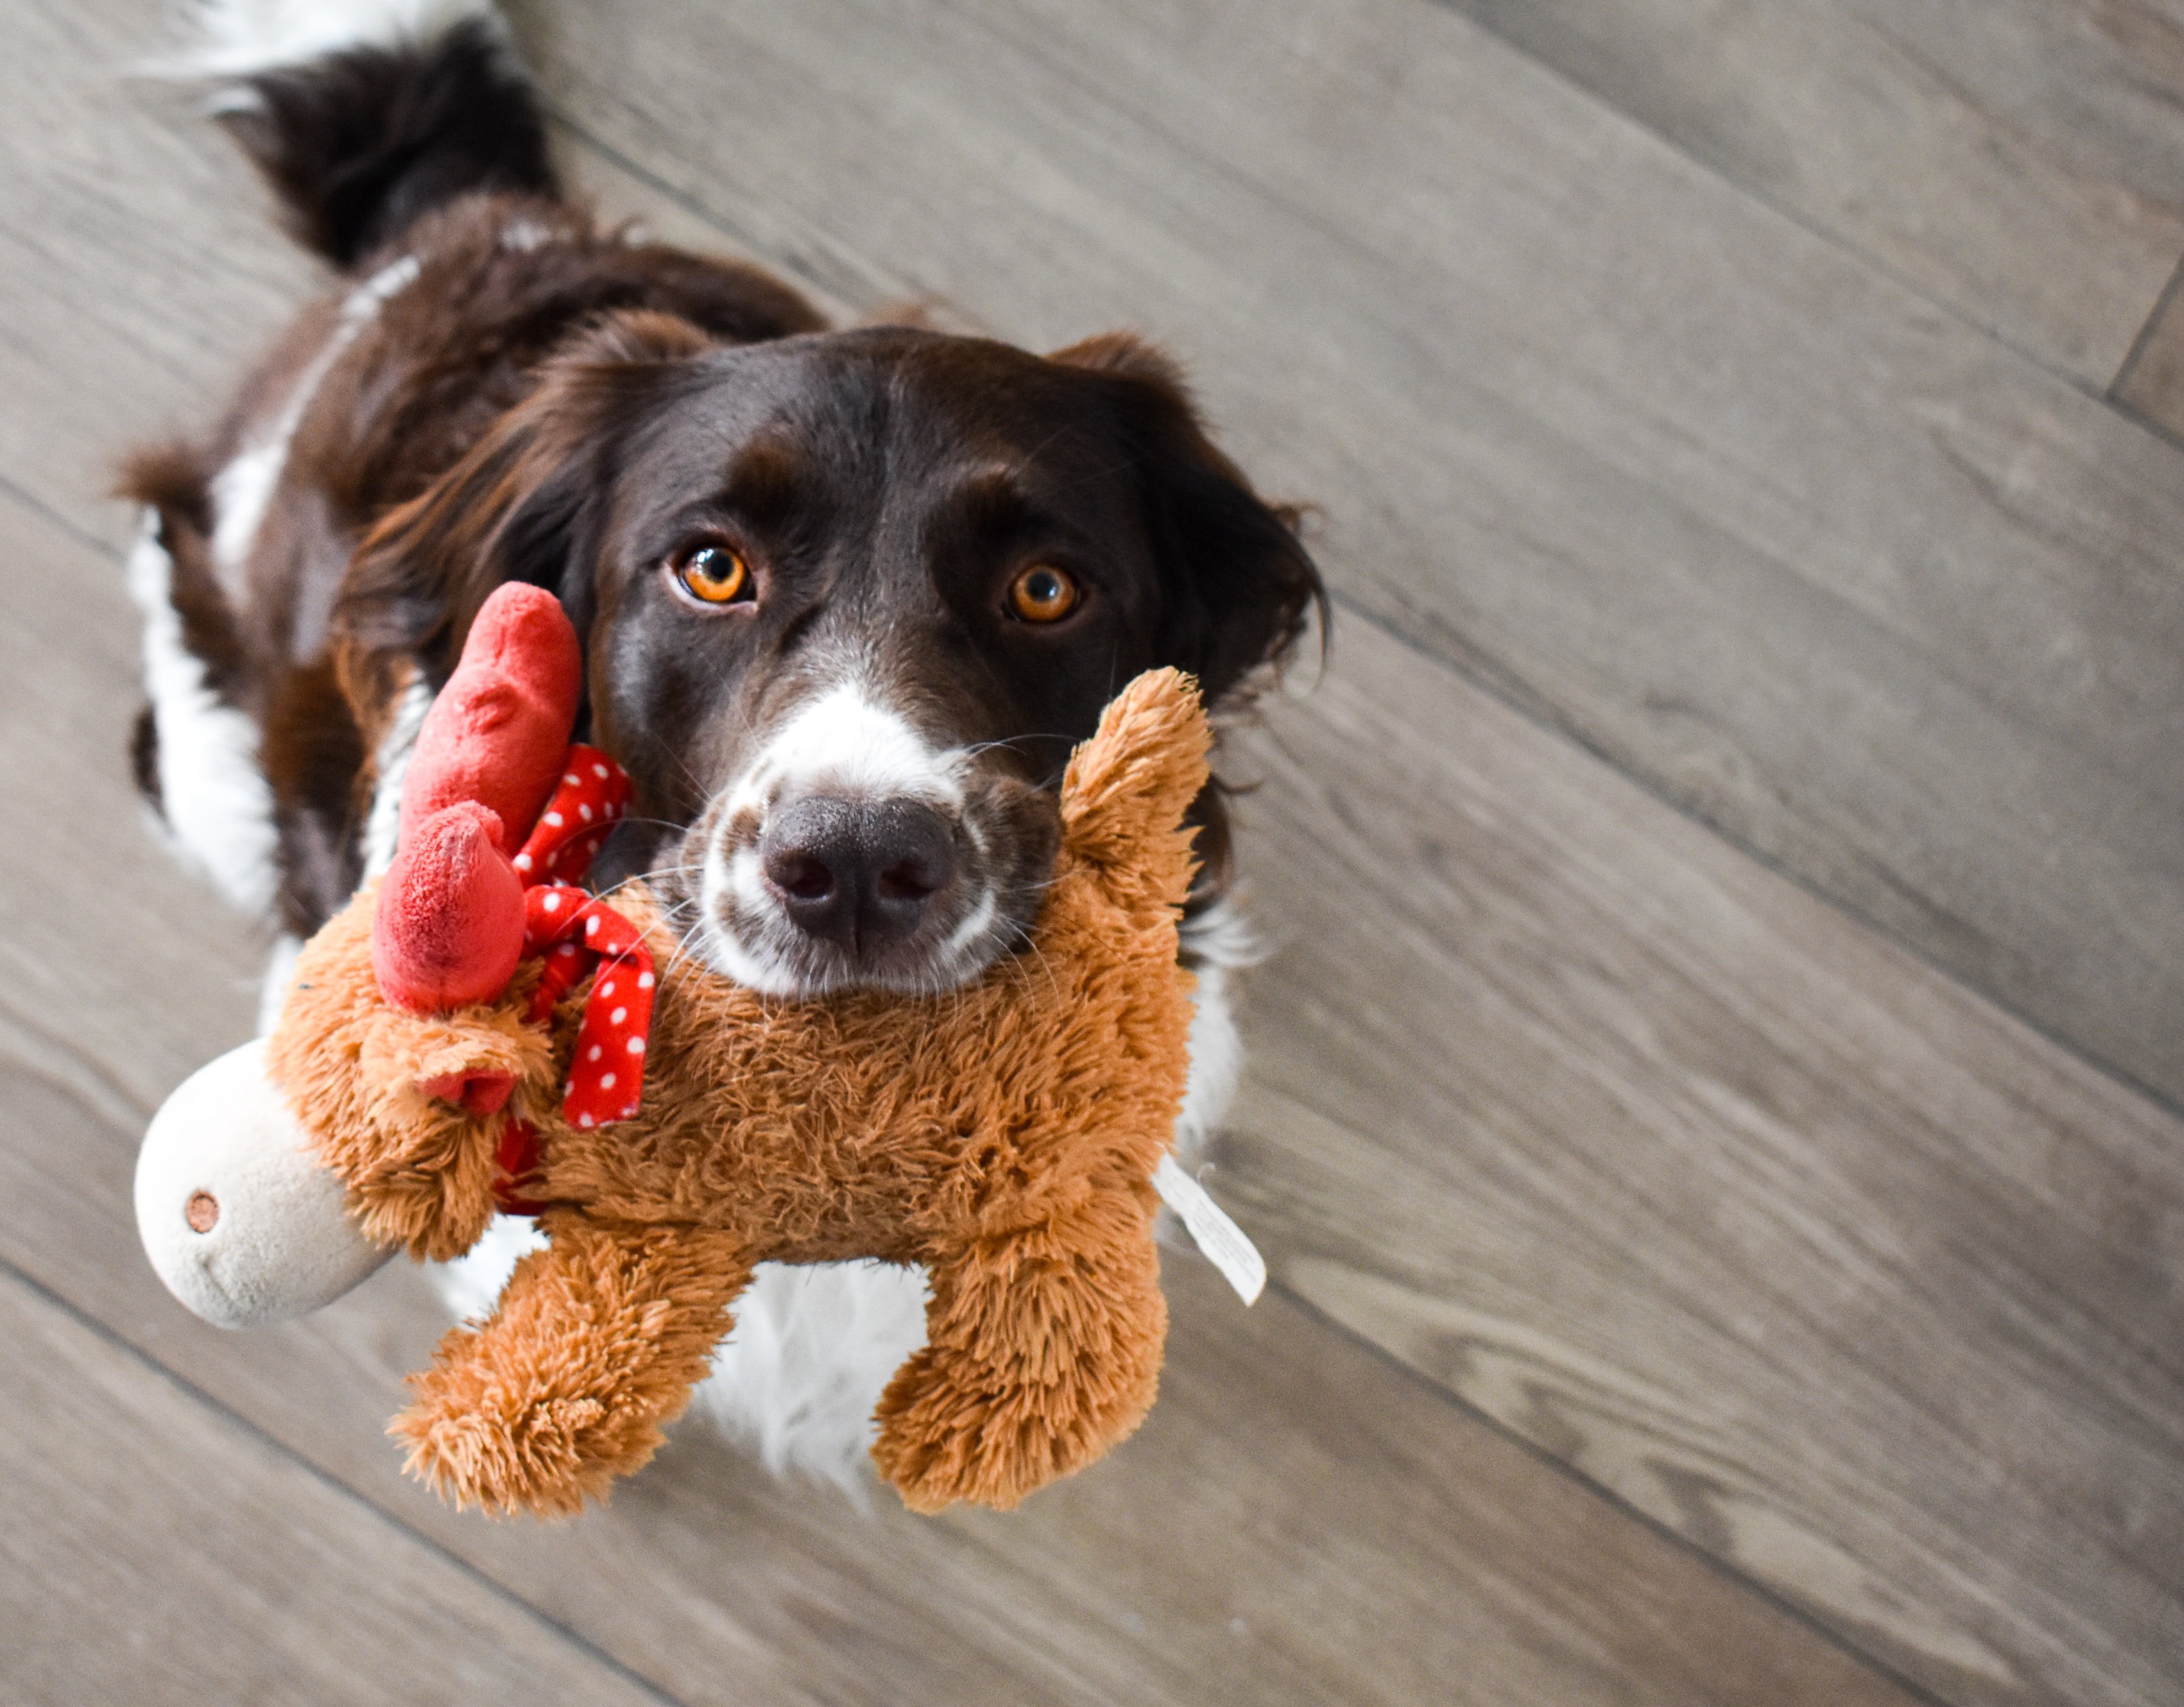 image of dog holding toy in its mouth.